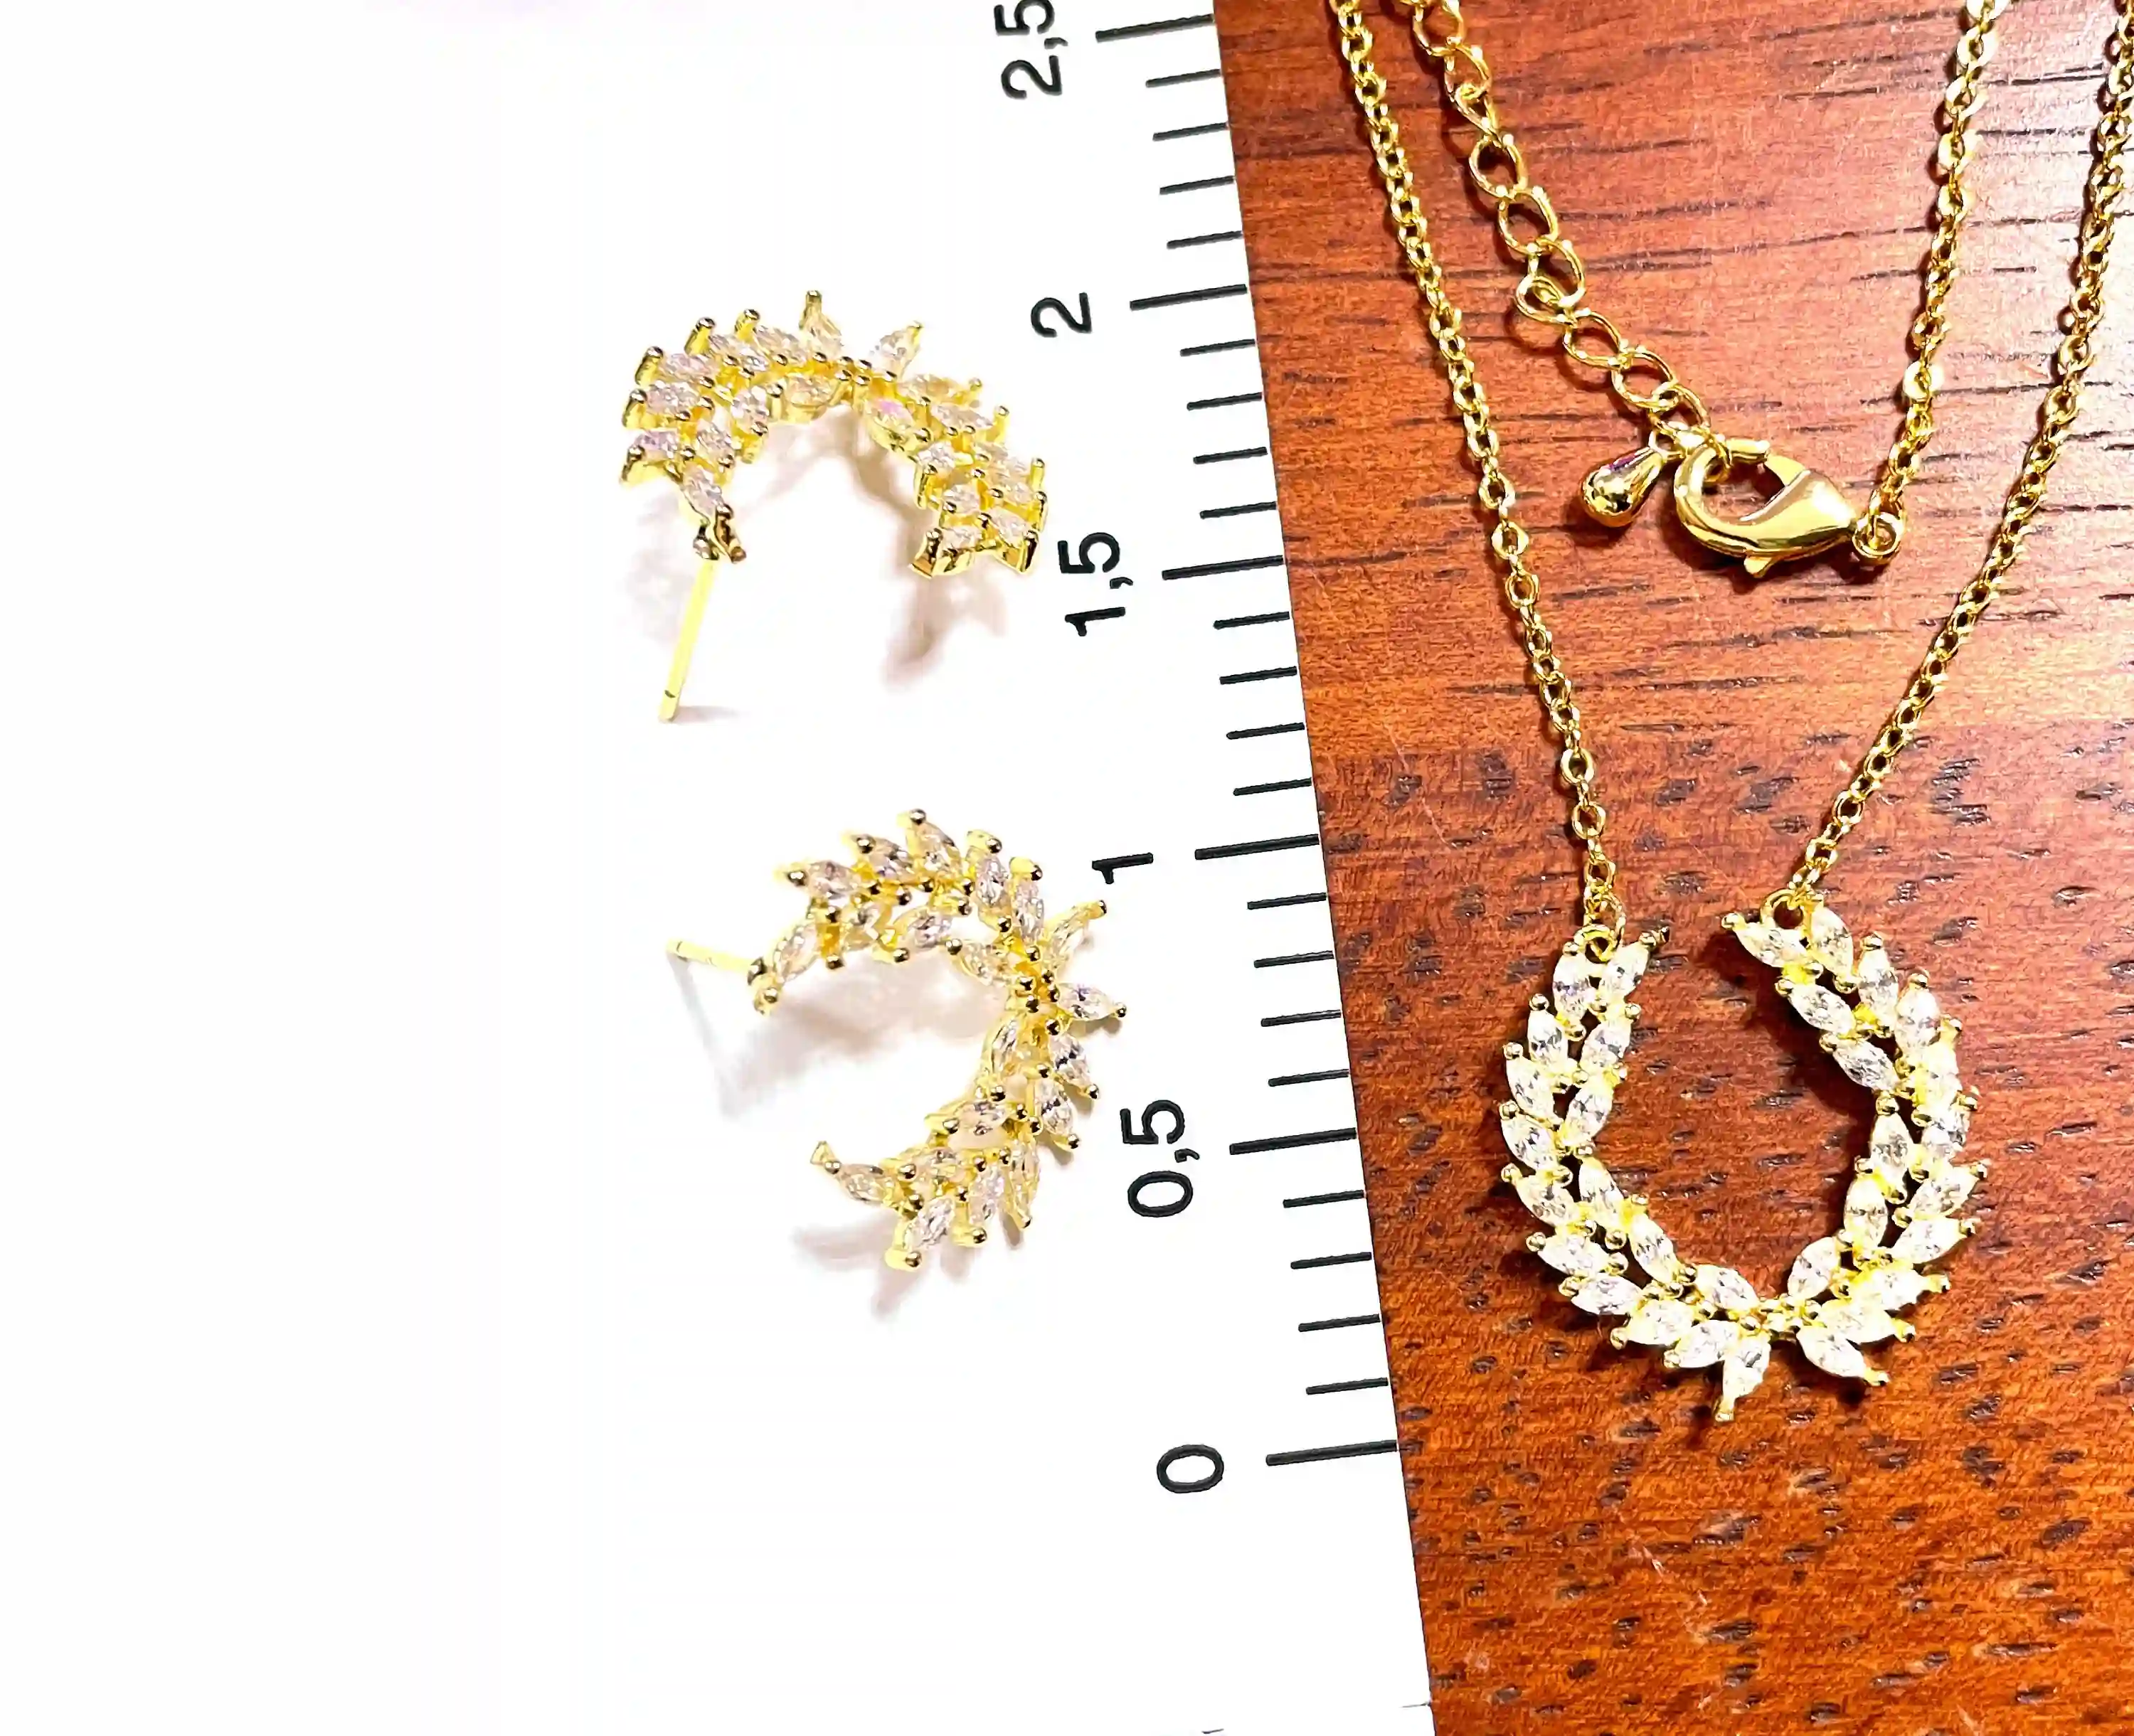 24k Swarovski Bridal Shower Gold Jewelry for bride present , Olive Branch Necklace Earrings SET, Handmade Jewelry, Sterling Silver GoldPlate 